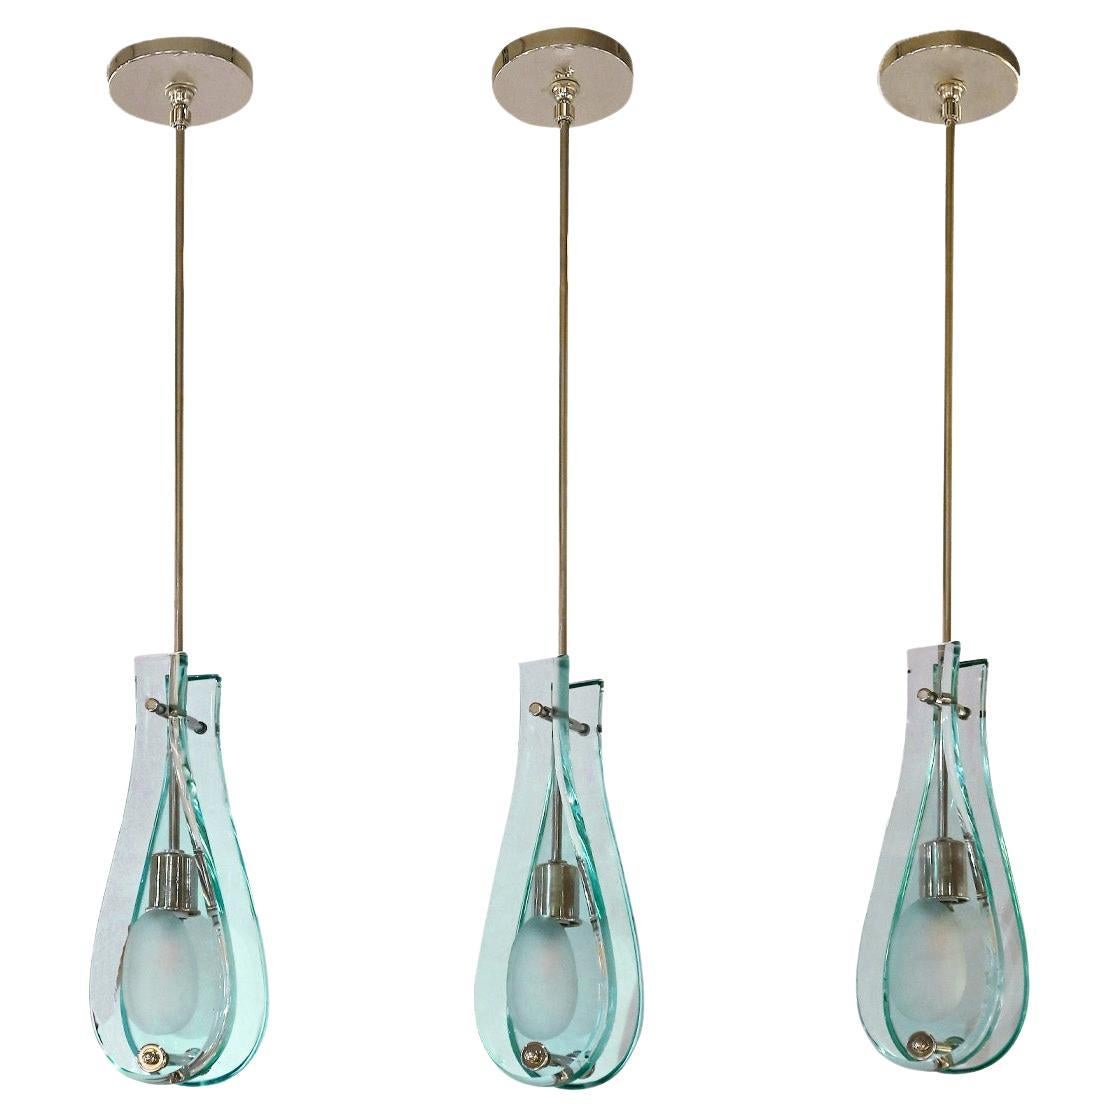 Set of 3 Fontana Arte Style Lights with Hand-Cut Glass Facades, 1950s For Sale